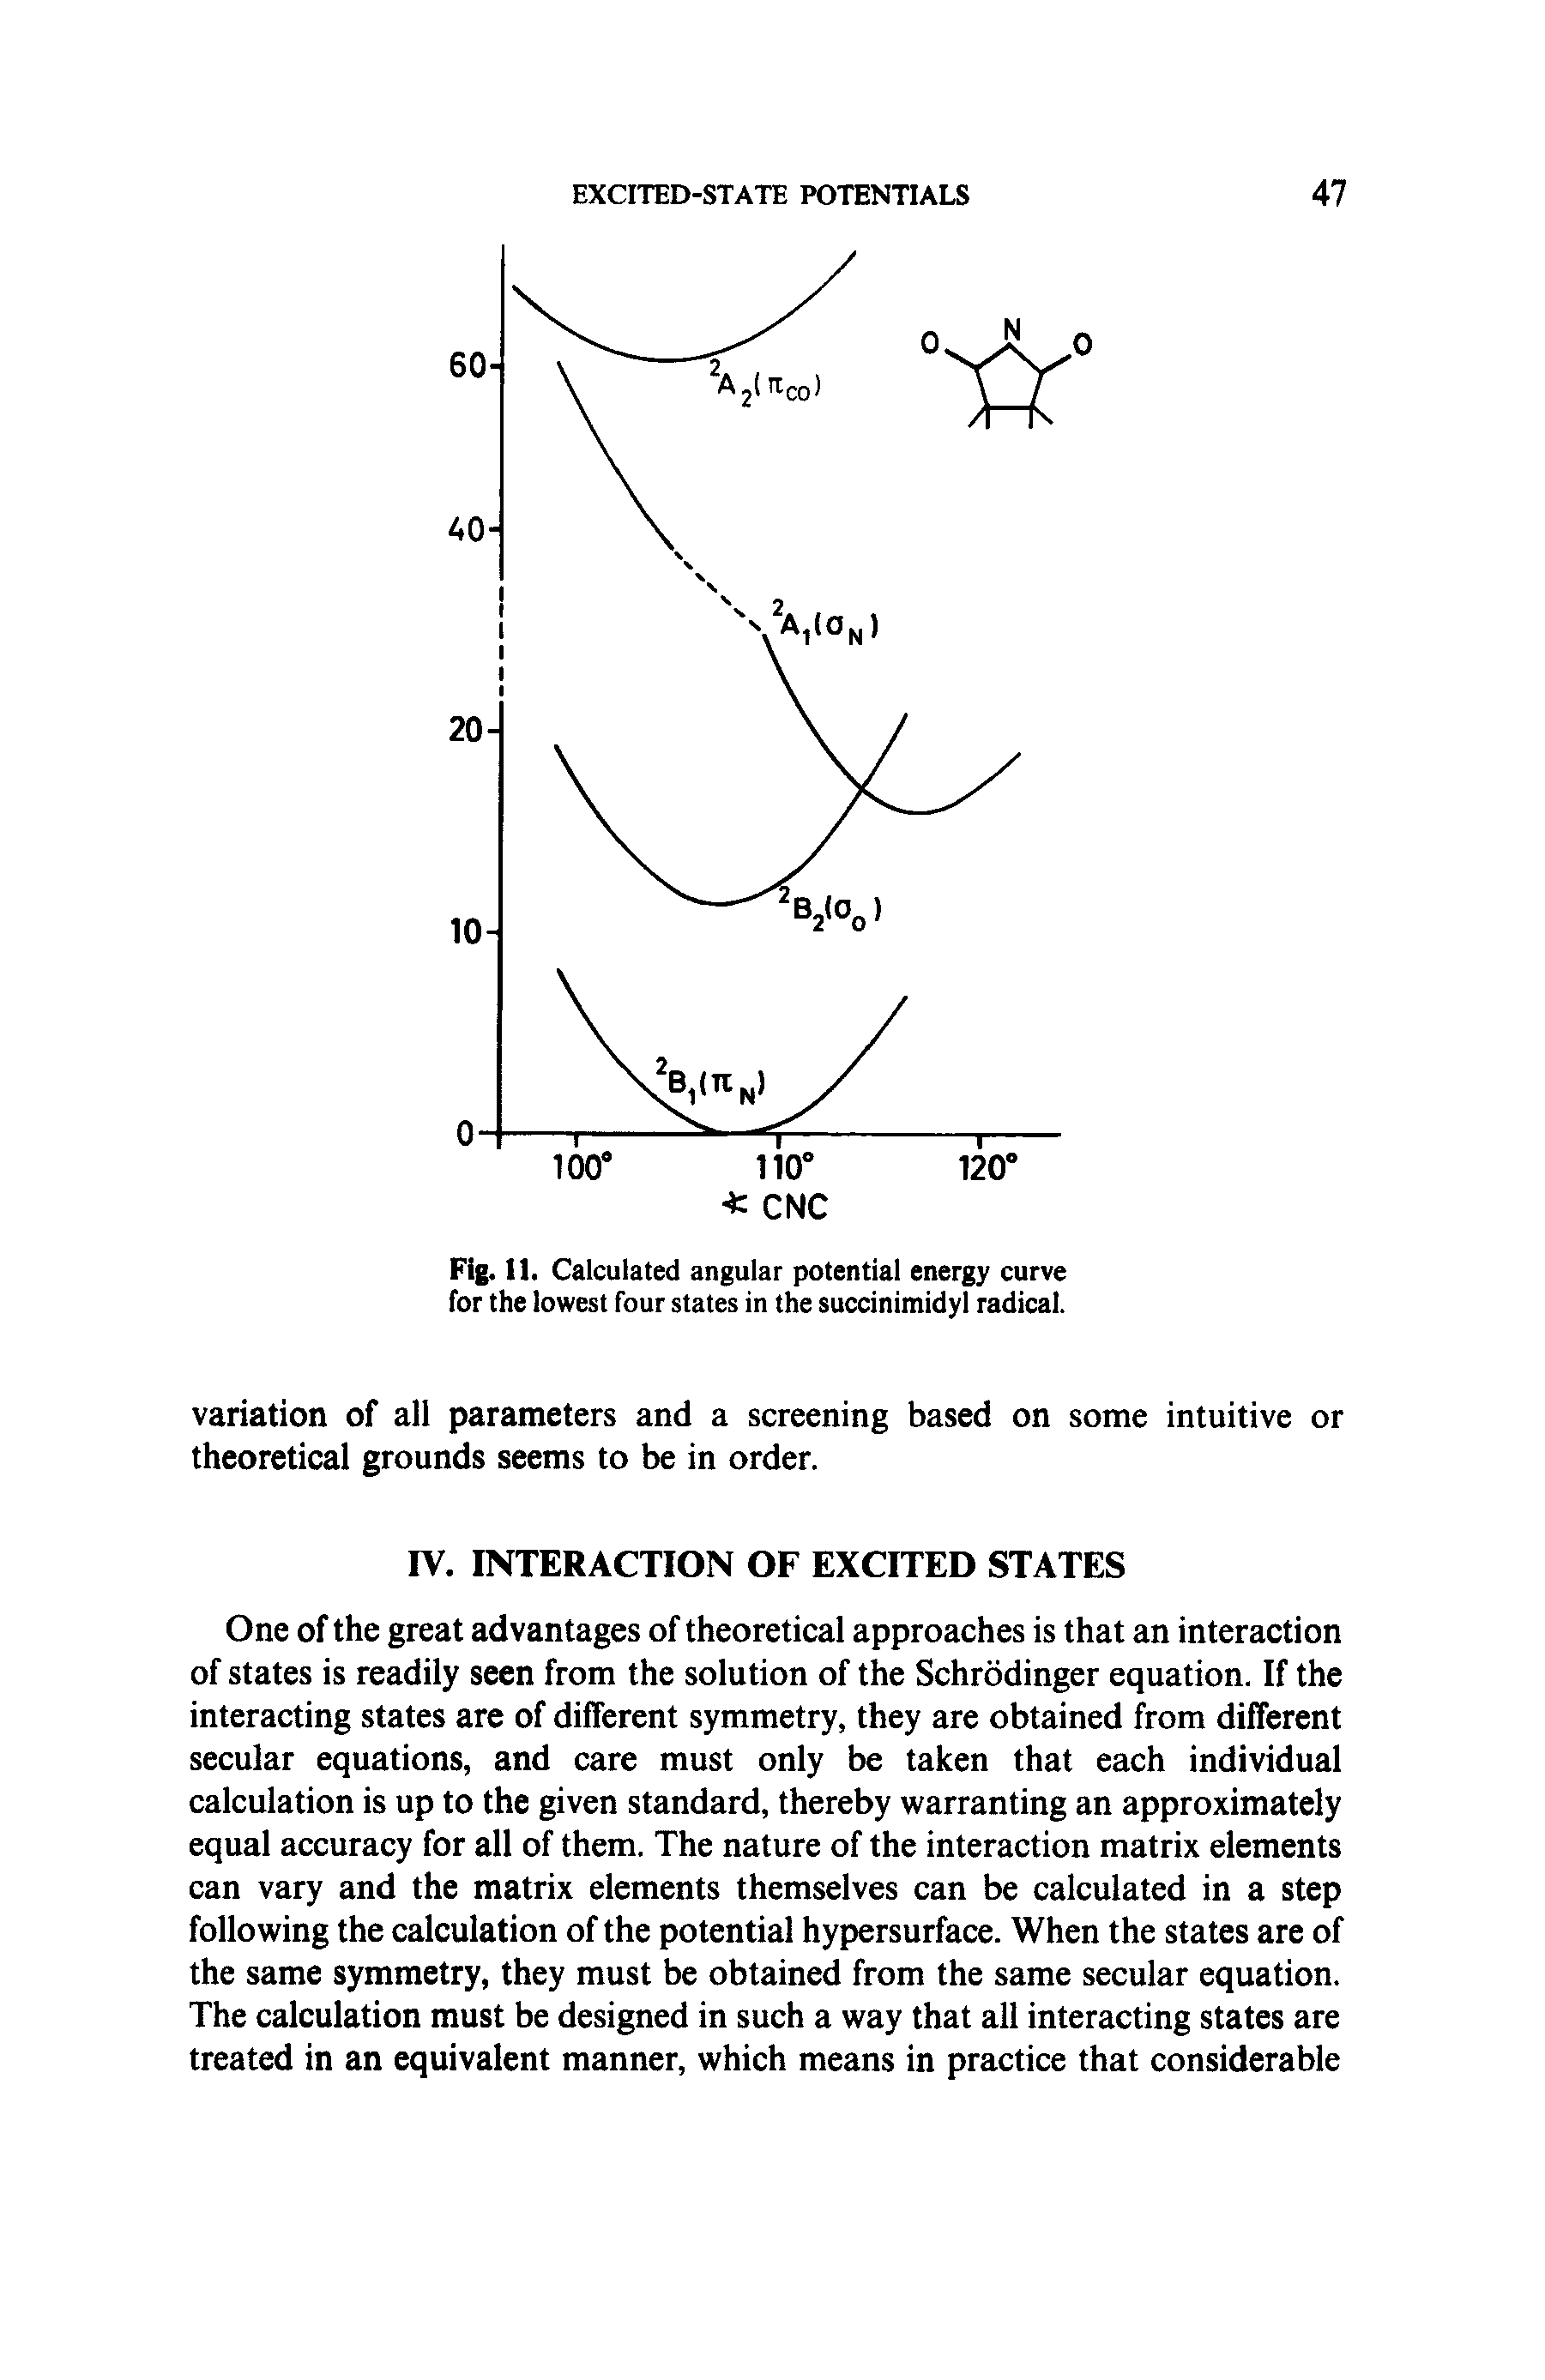 Fig. II. Calculated angular potential energy curve for the lowest four states in the succinimidyl radical.